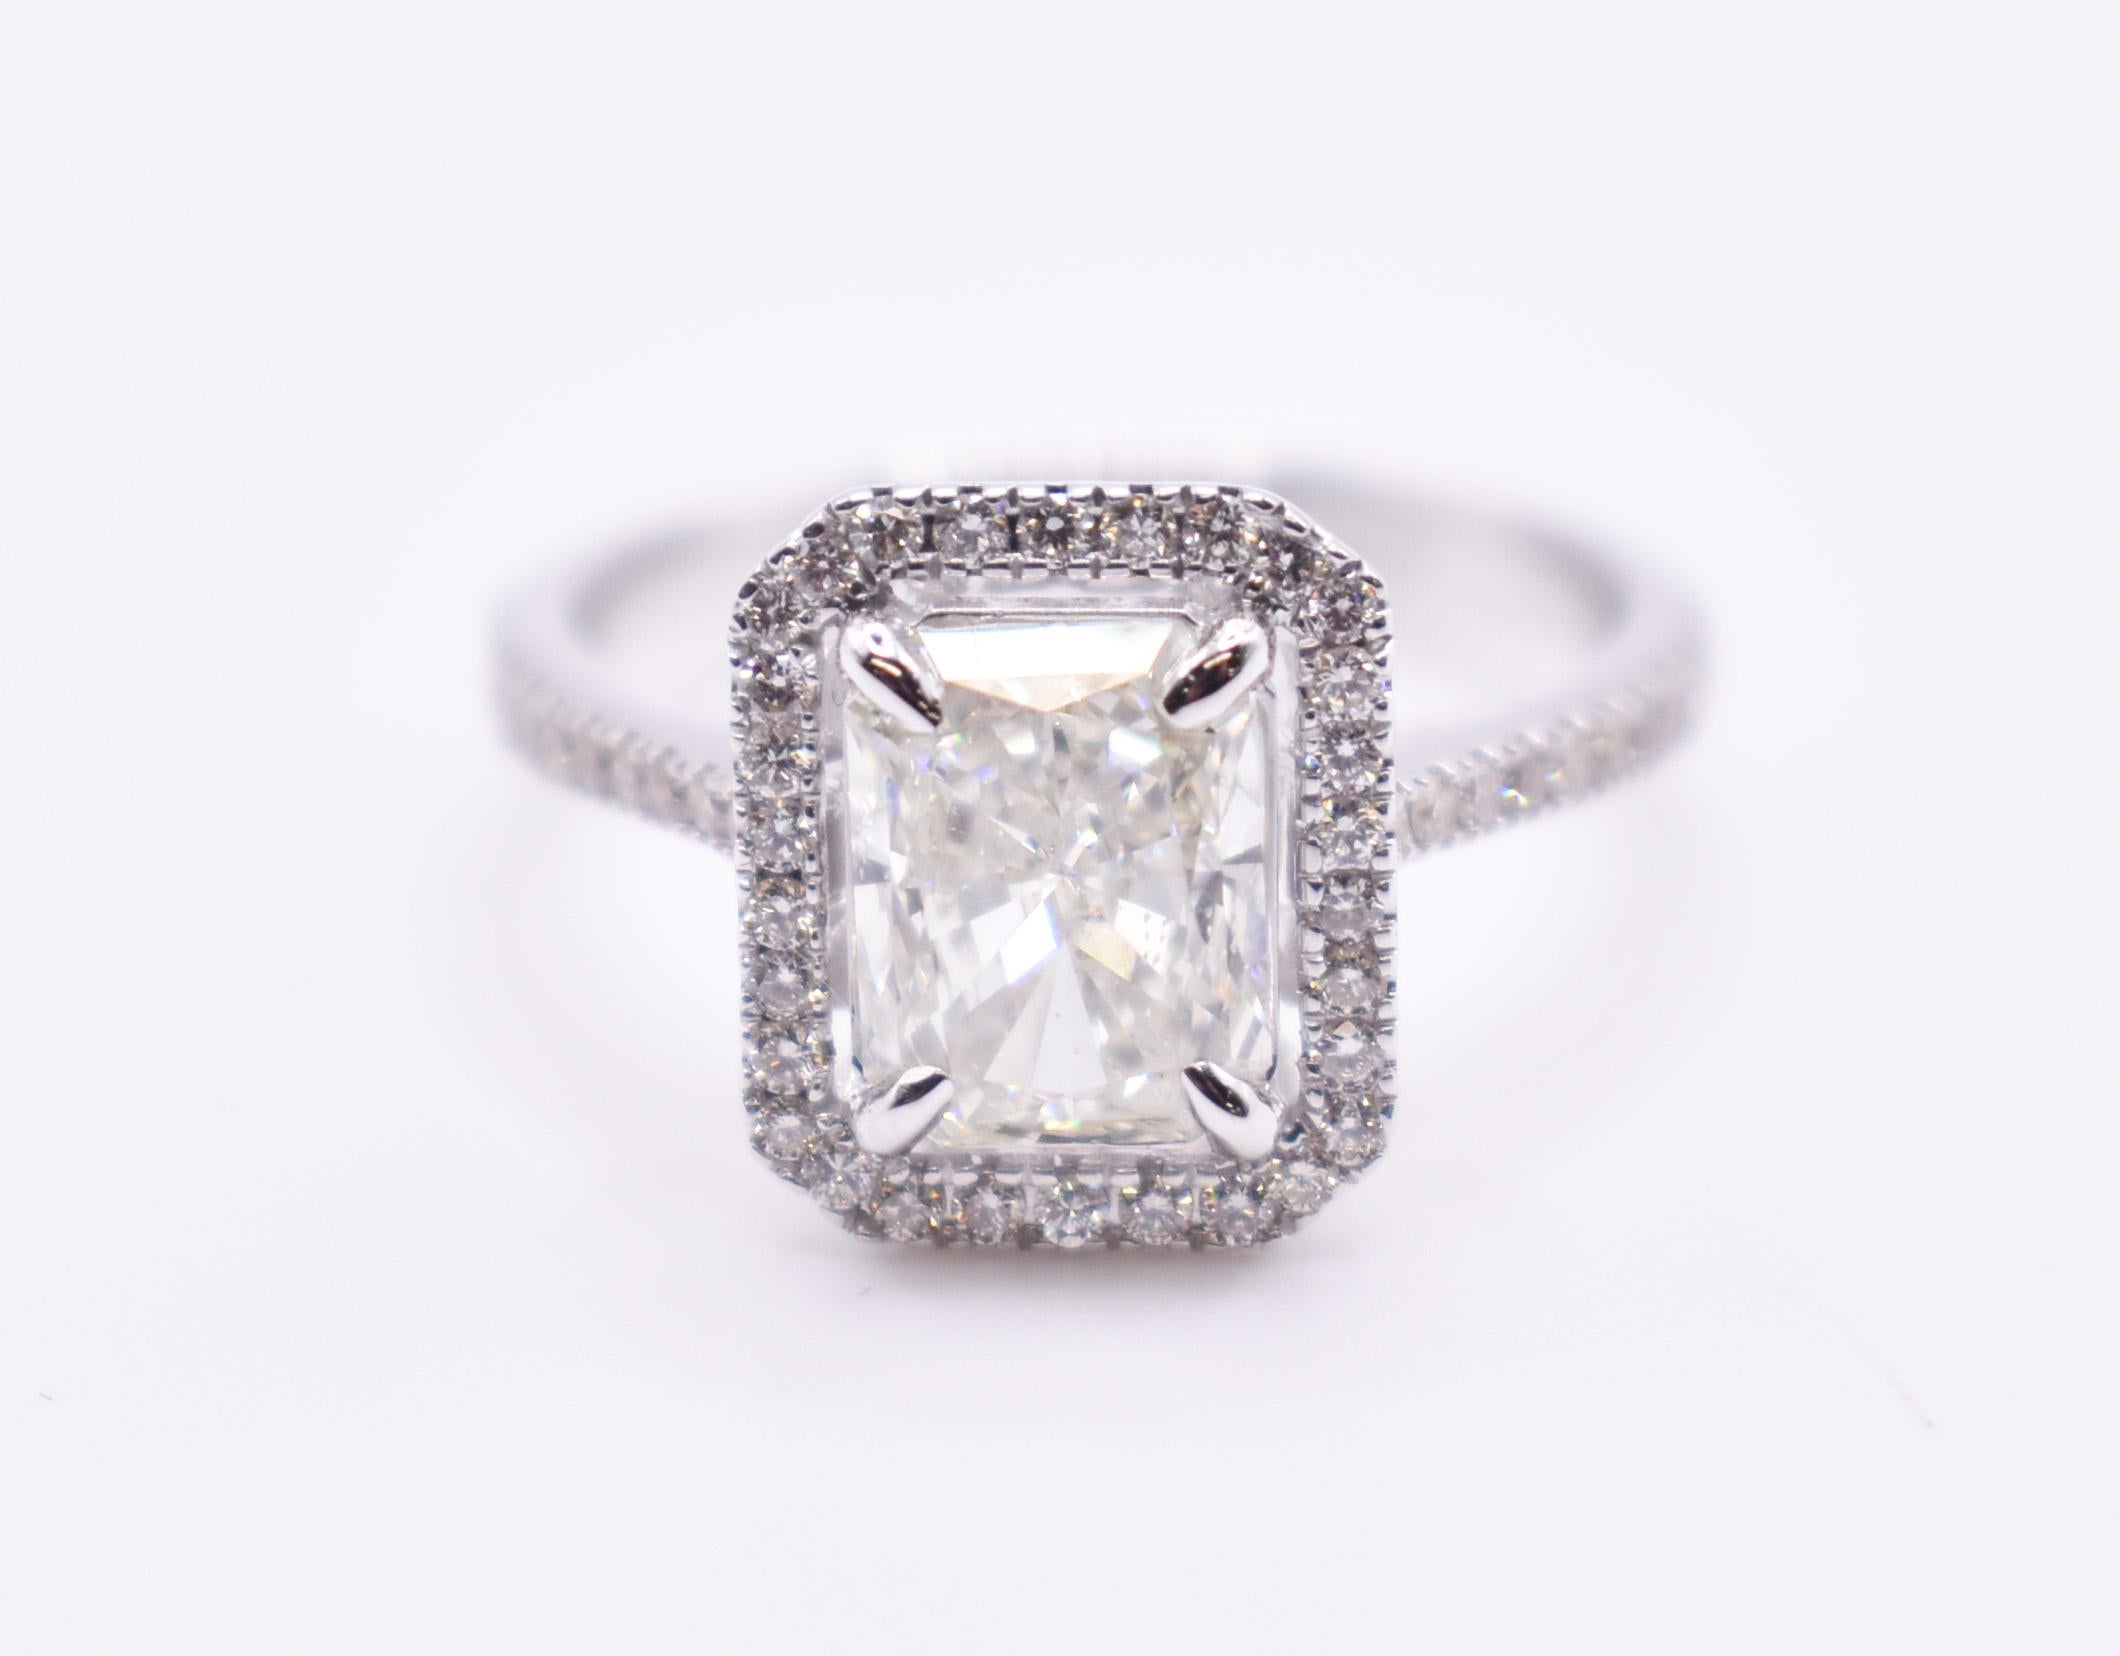 On offer for sale is a lovely radiant halo style ring, featuring a 1.80ct cushion cut diamond to the centre in a prong setting, with a halo surround adding another 0.40ct weight of diamonds.

Metal: 18K White Gold
Total Carat Weight: 2.20ct
Colour: